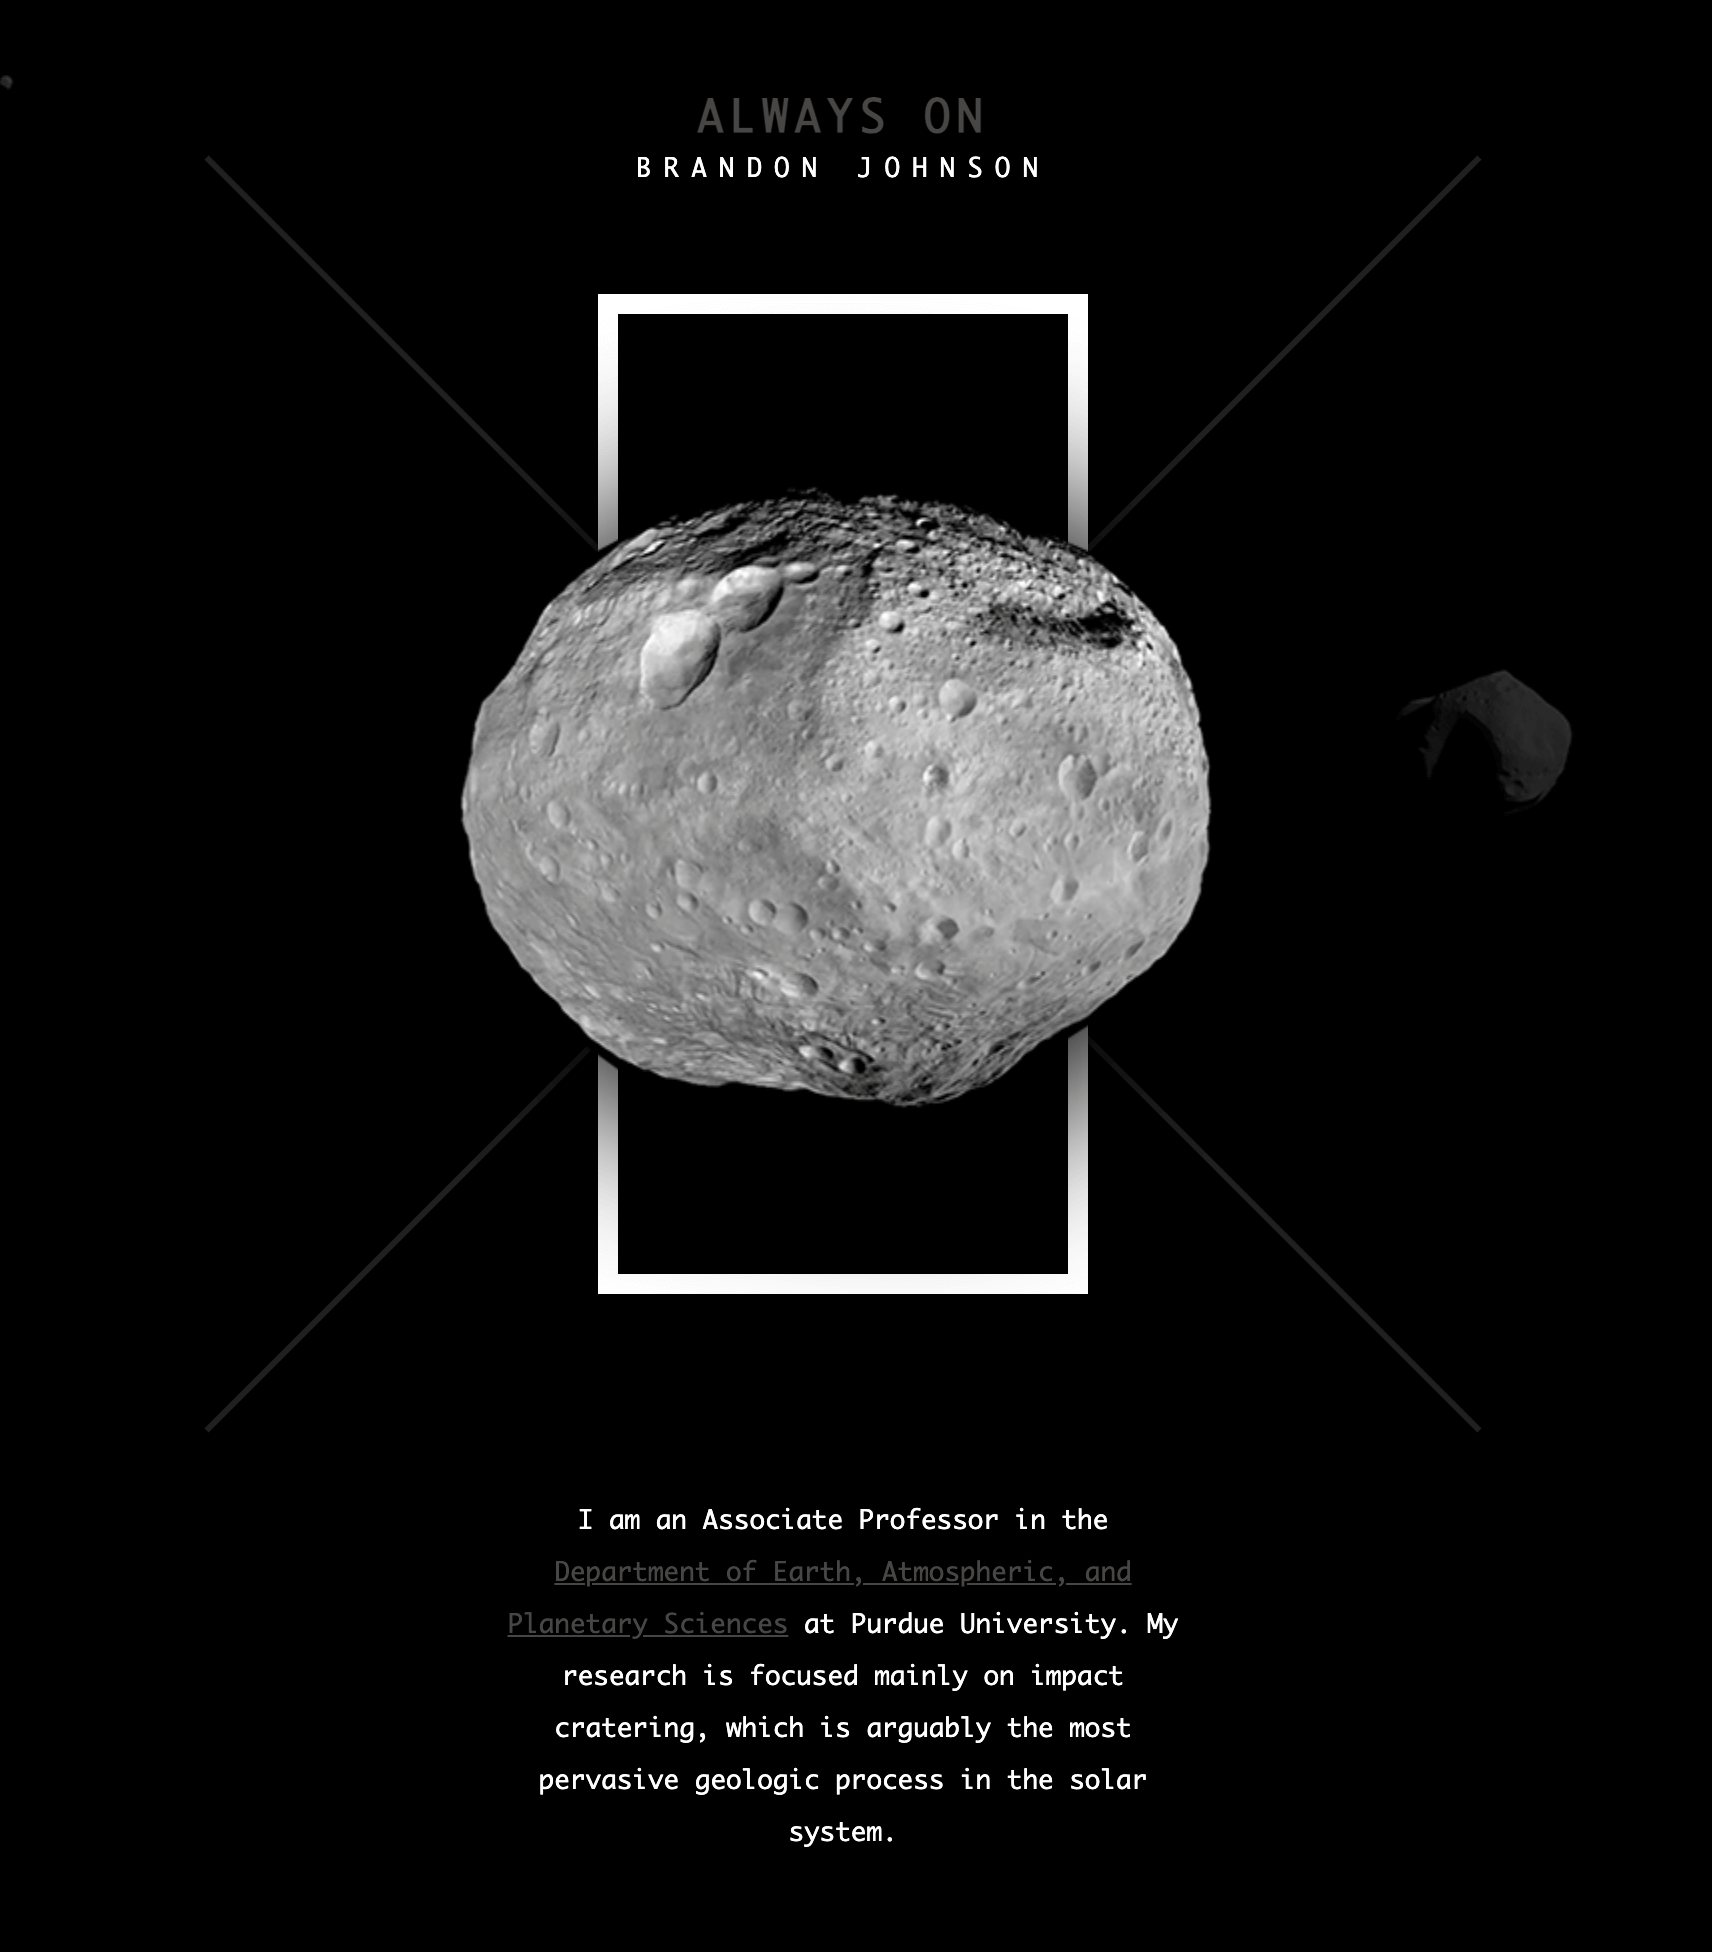 The about page for Brandon Johnson's website. Image is of a meteoroid, text reads "I am an Associate Professor in the department of Earth, atmospheric, and planetary sciences at Purdue University. My research is focused mainly on impact cratering, which is arguably the most pervasive geologic process in the solar system."